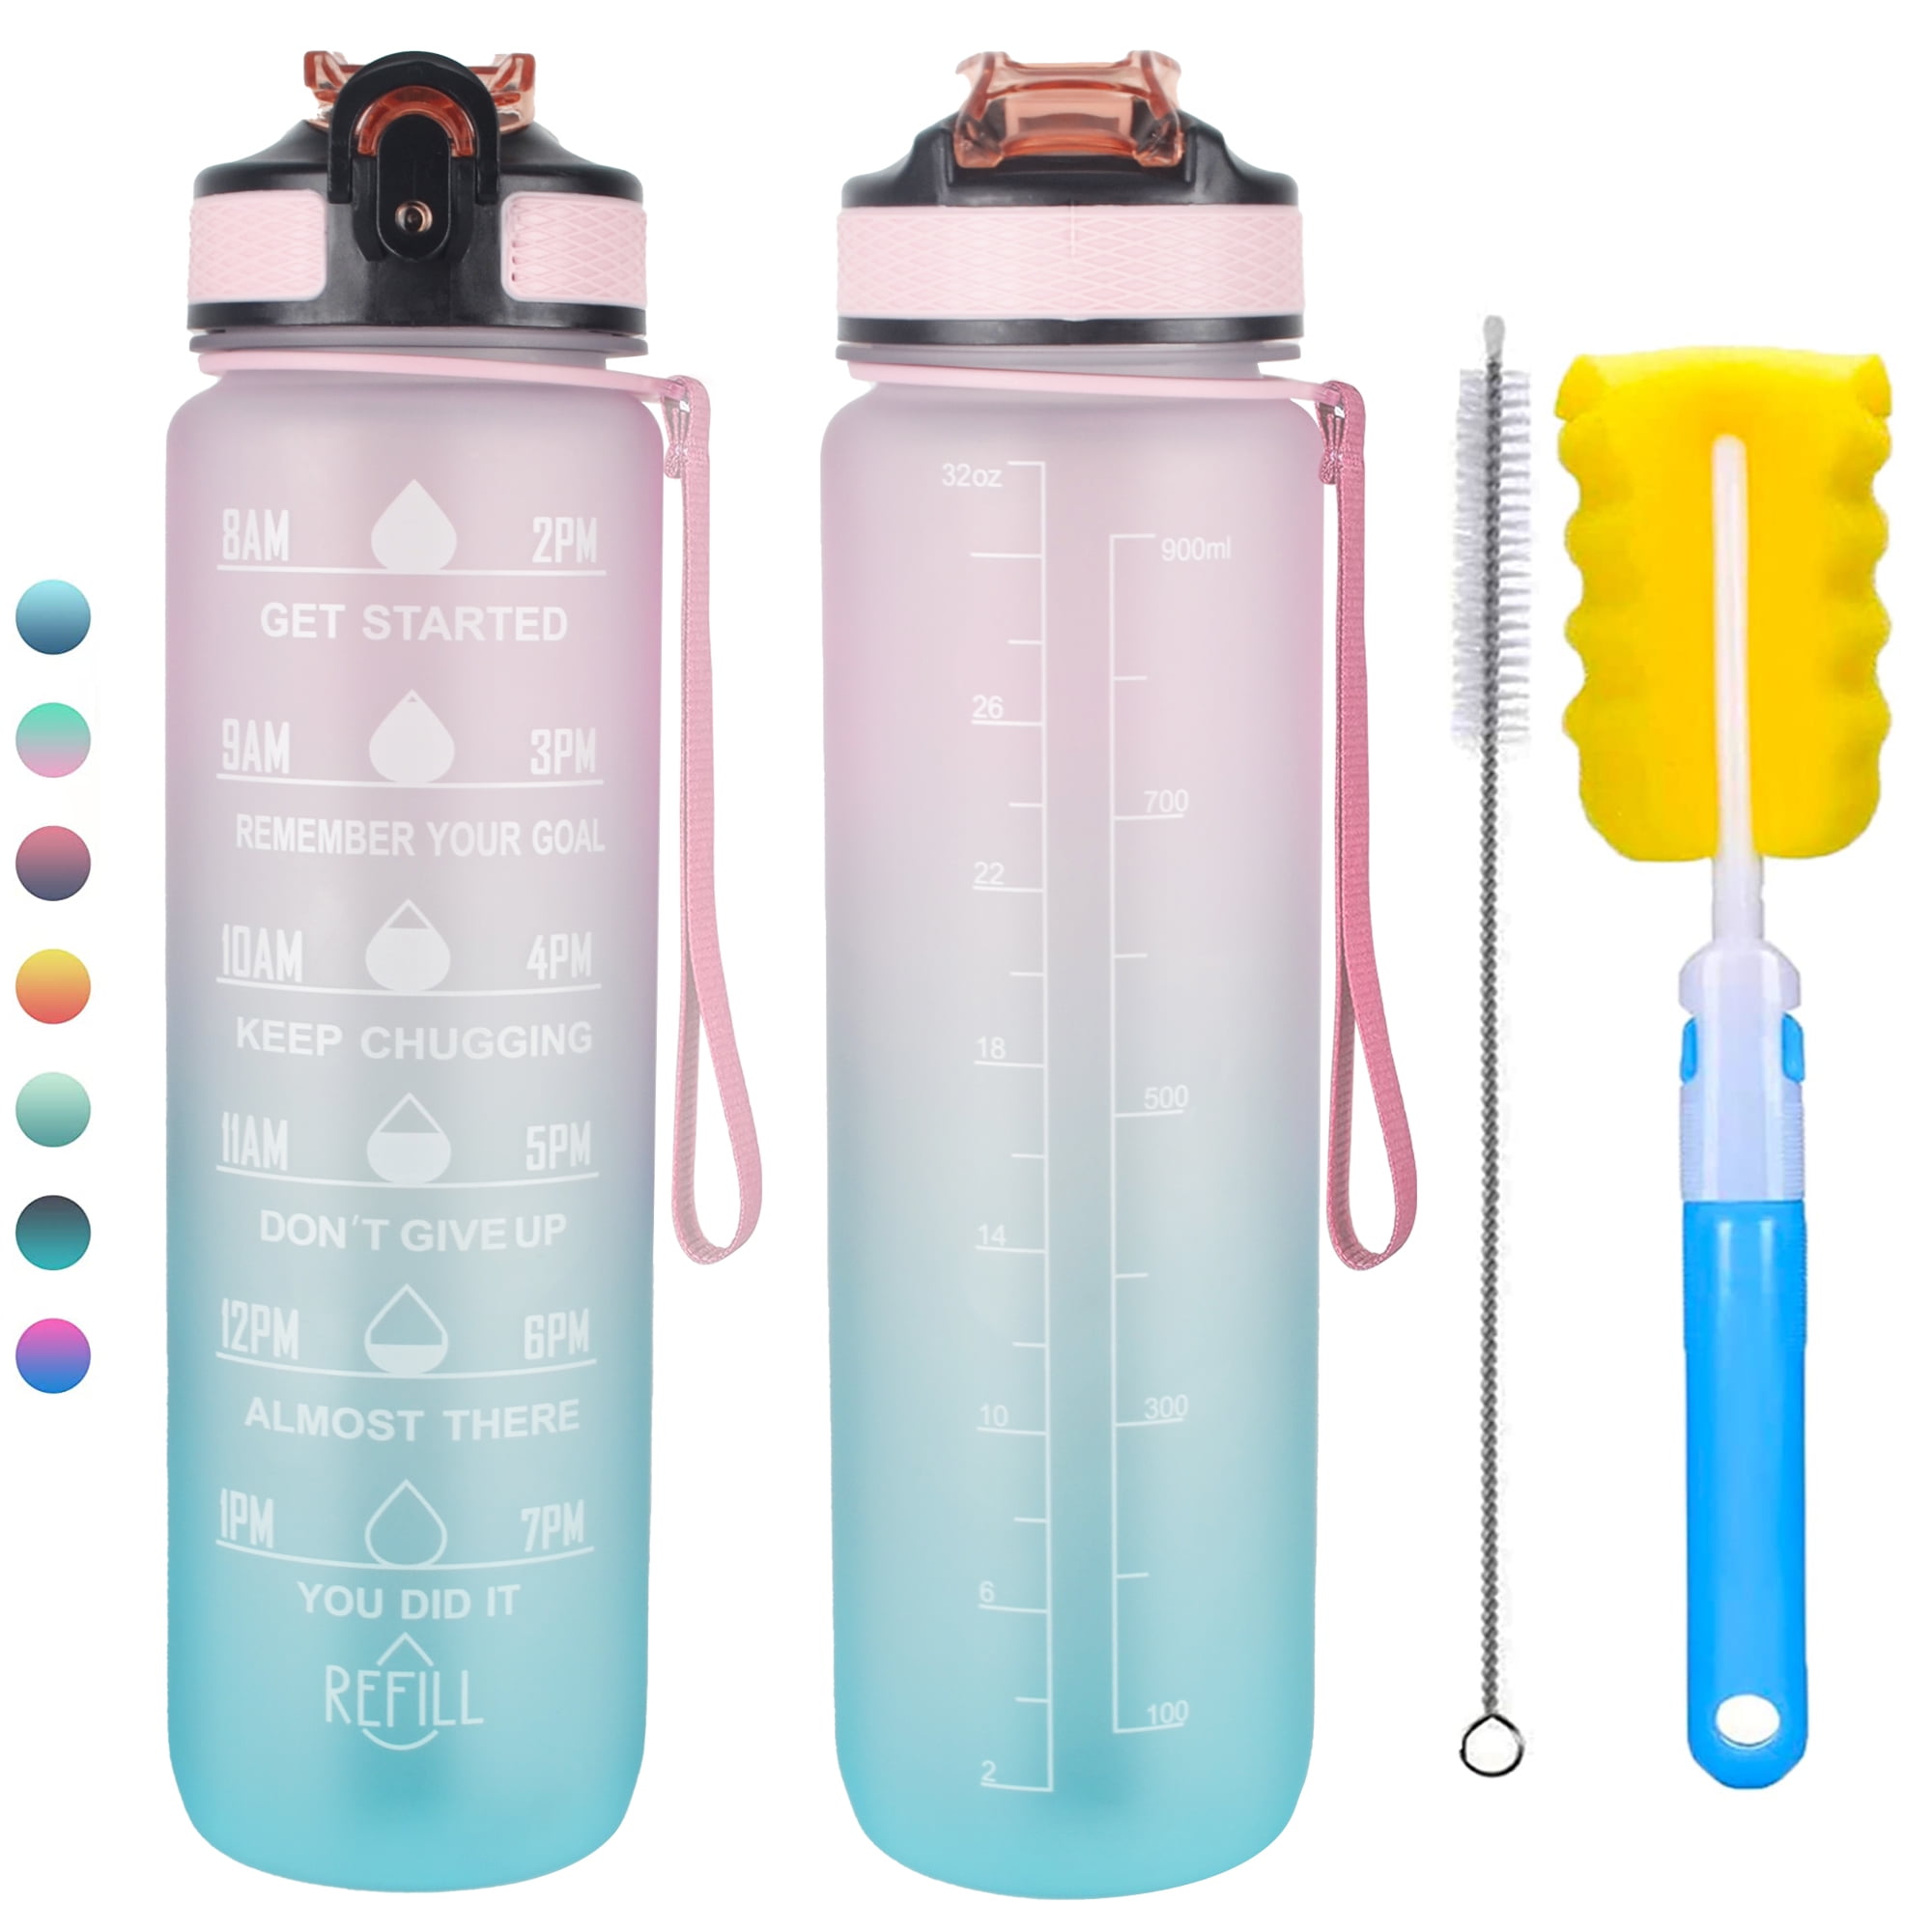 Improve your Daily Water Intake,900ml HYDRATEM8 Hydration Motivational Tracker Fitness Sports Water bottle With Straw and Time Markings,BPA Free Non-Toxic Tritan 